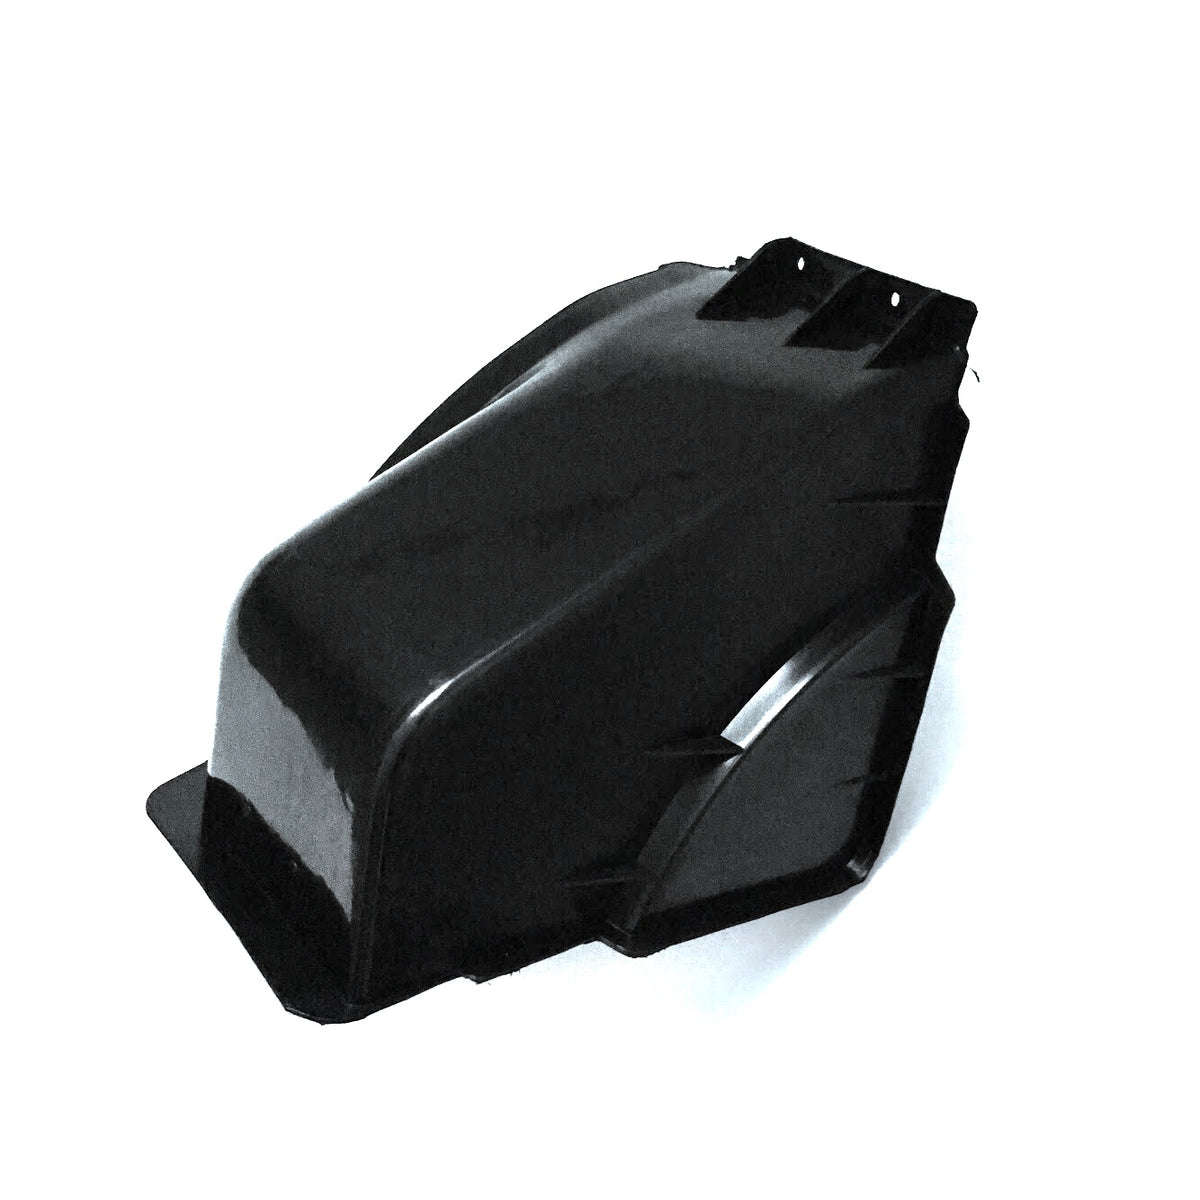 EMC REAR MUDGUARD FOR LOW SPEED VEHICLES SOLD AS PAIRS